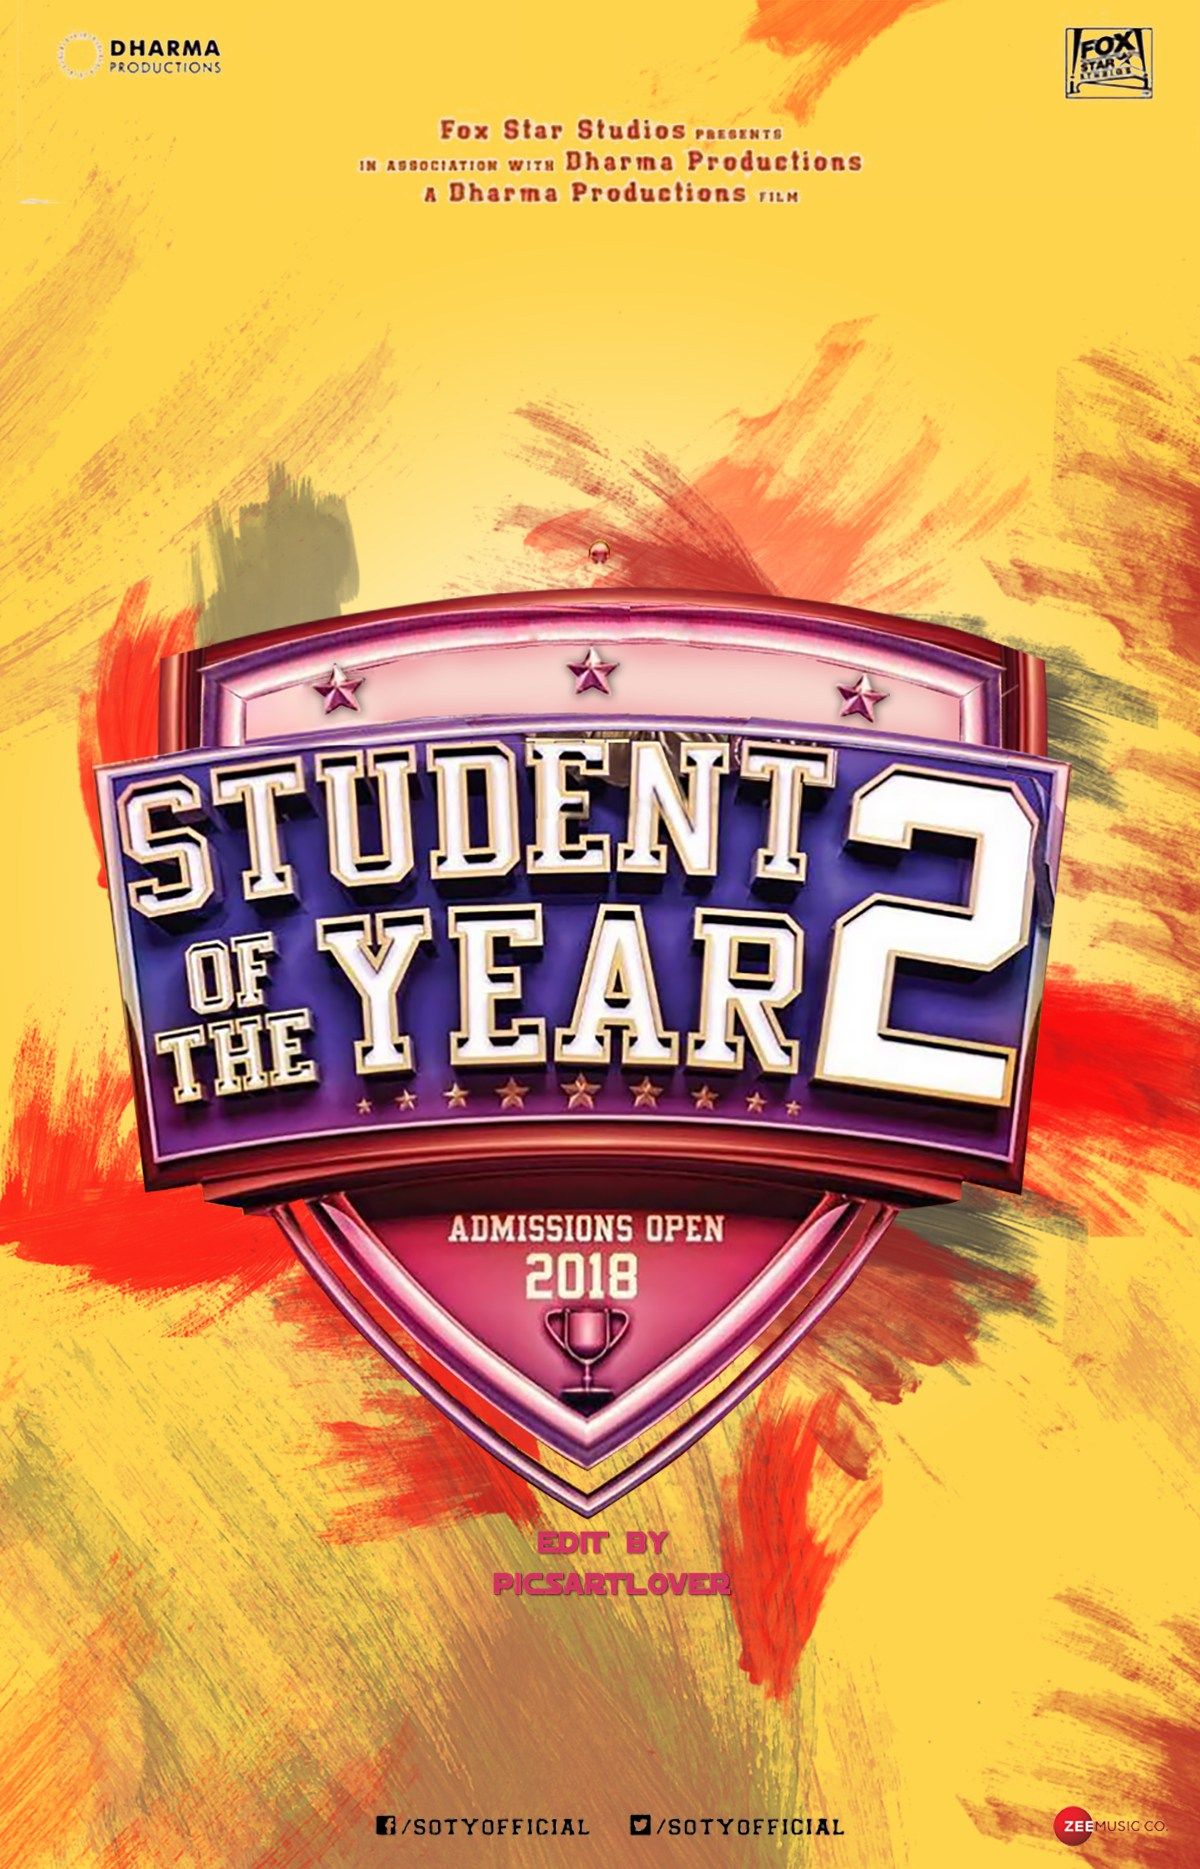 Student Of Year Movie Poster Background Png In Picsart